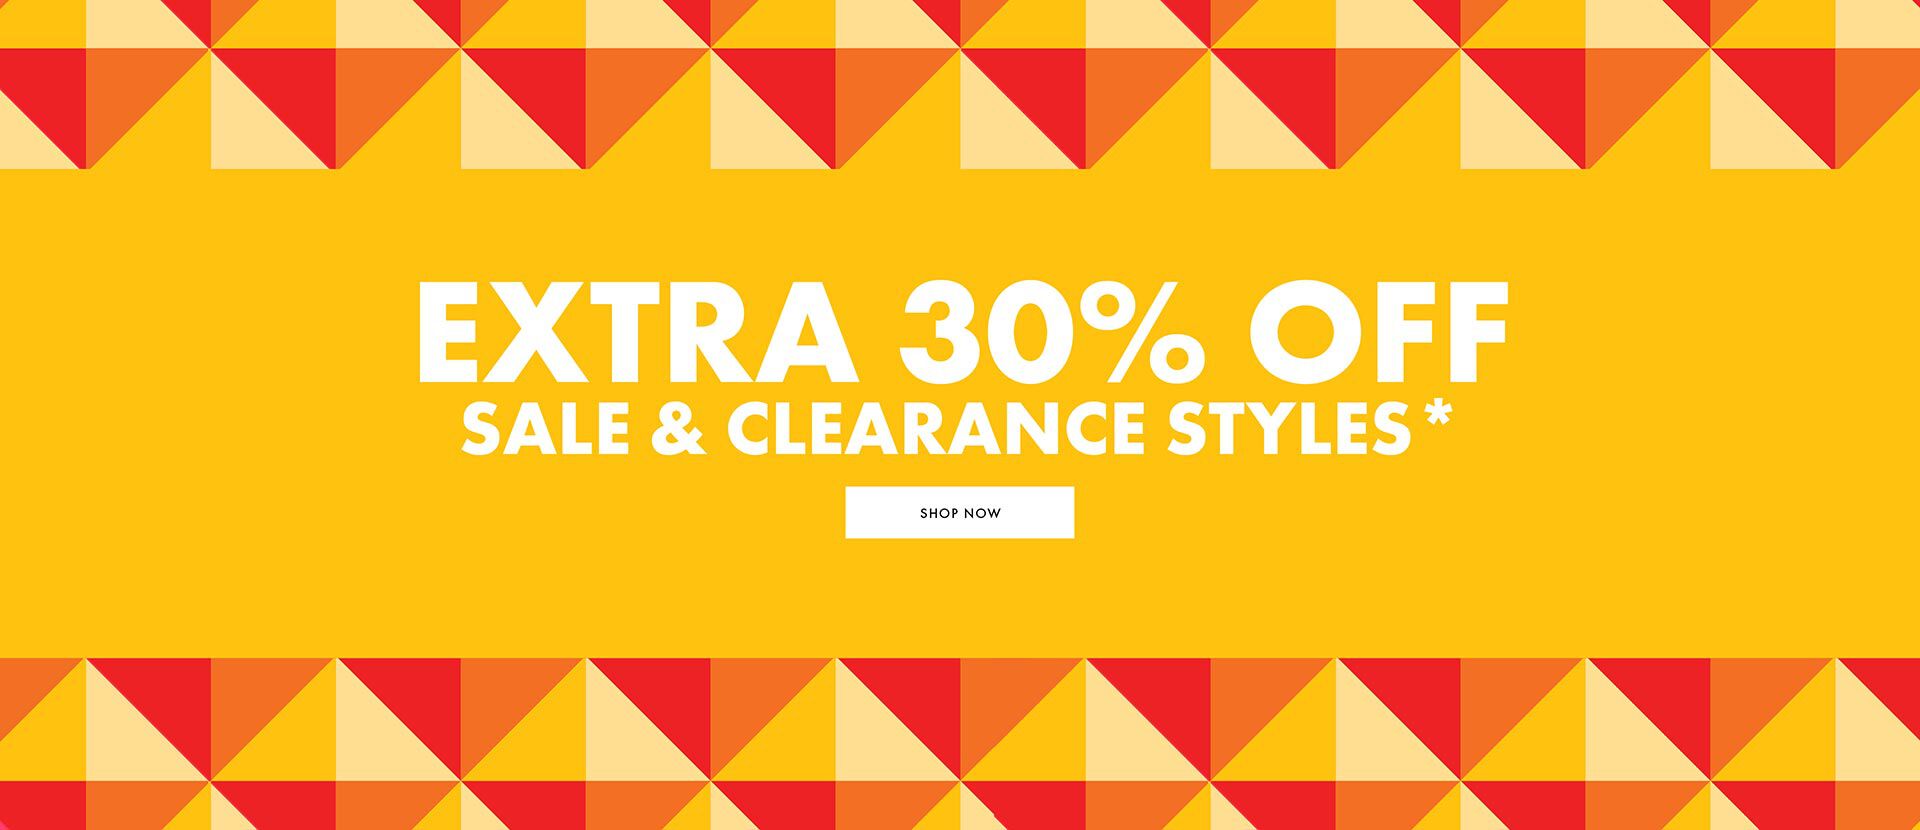 30% off Sale & Clearance*